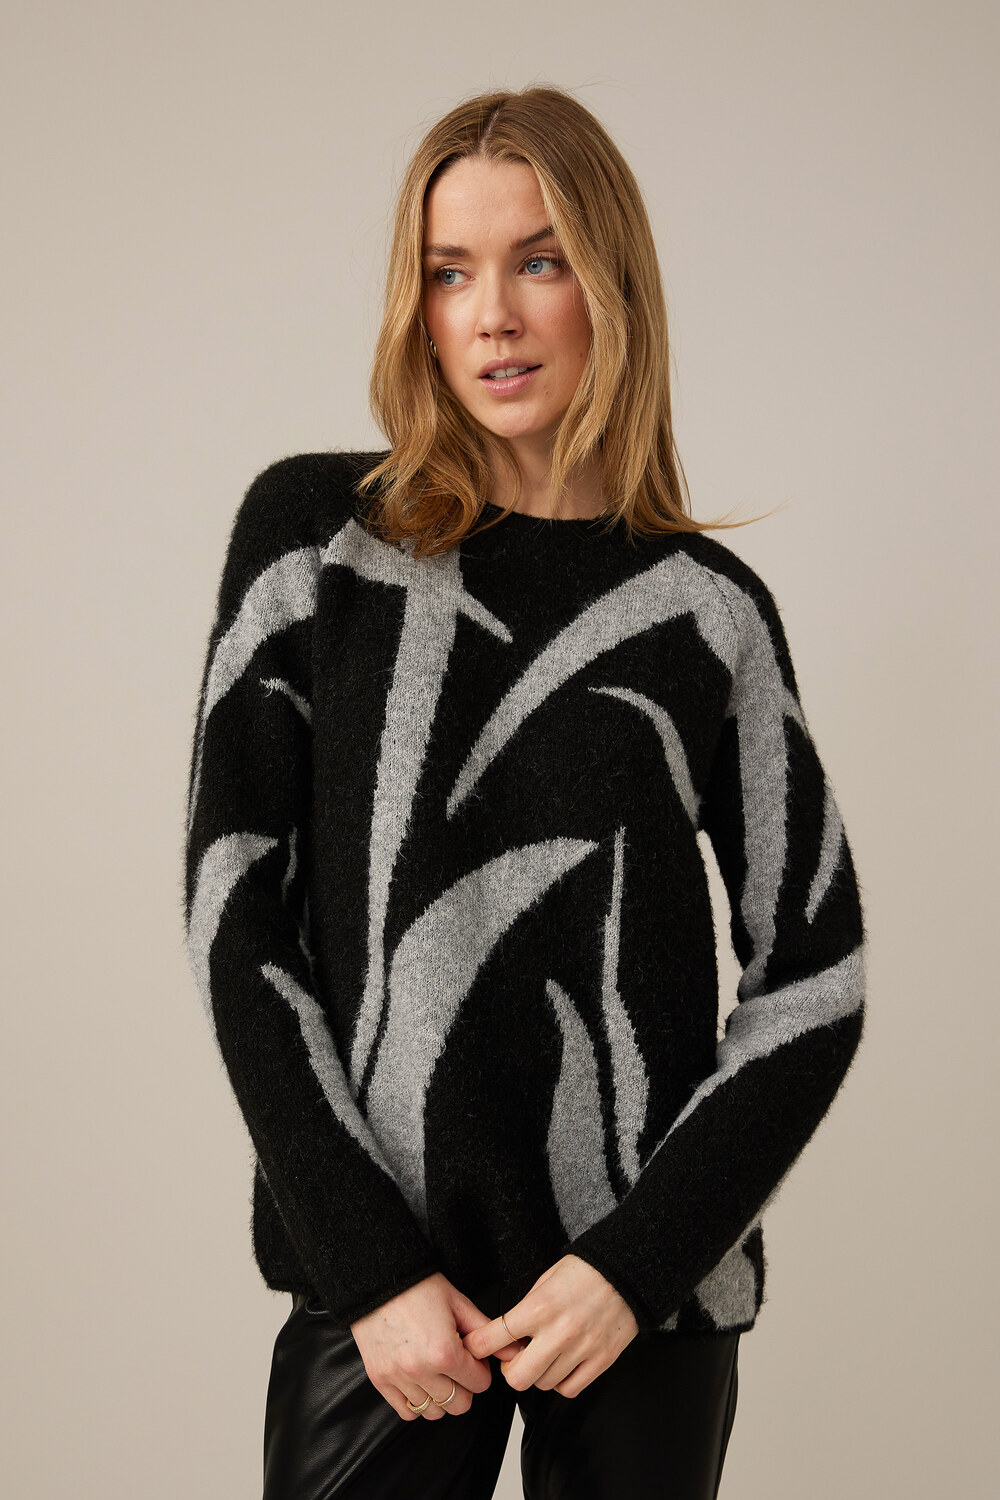 Emproved Abstract Lines Fuzzy Sweater Style A2207. Black/grey